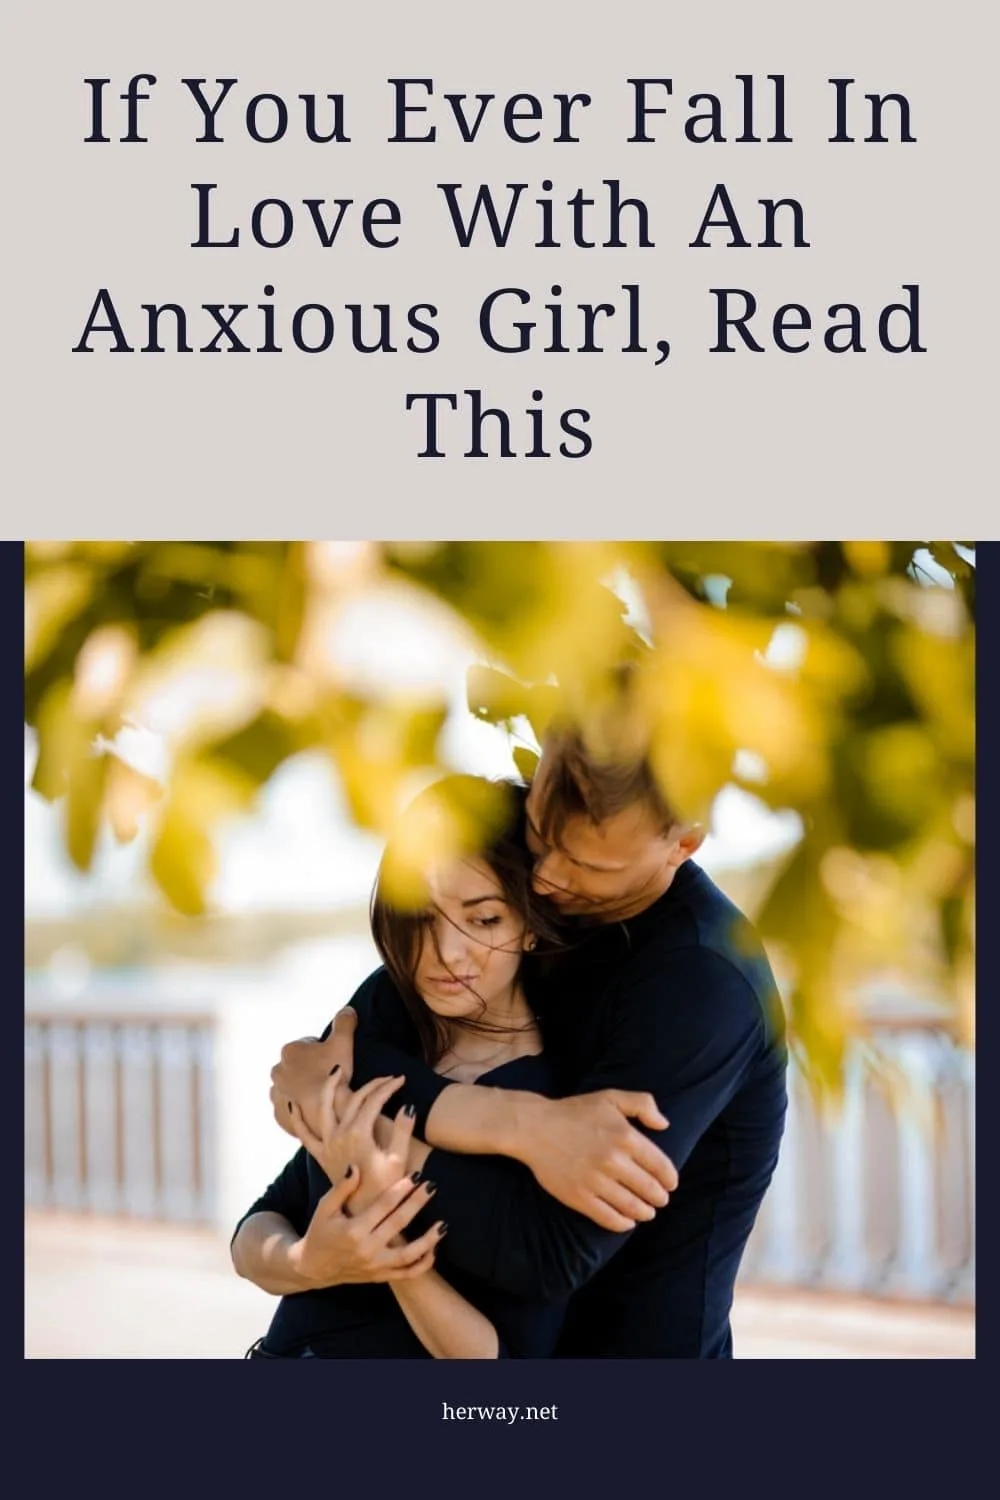 If You Ever Fall In Love With An Anxious Girl, Read This